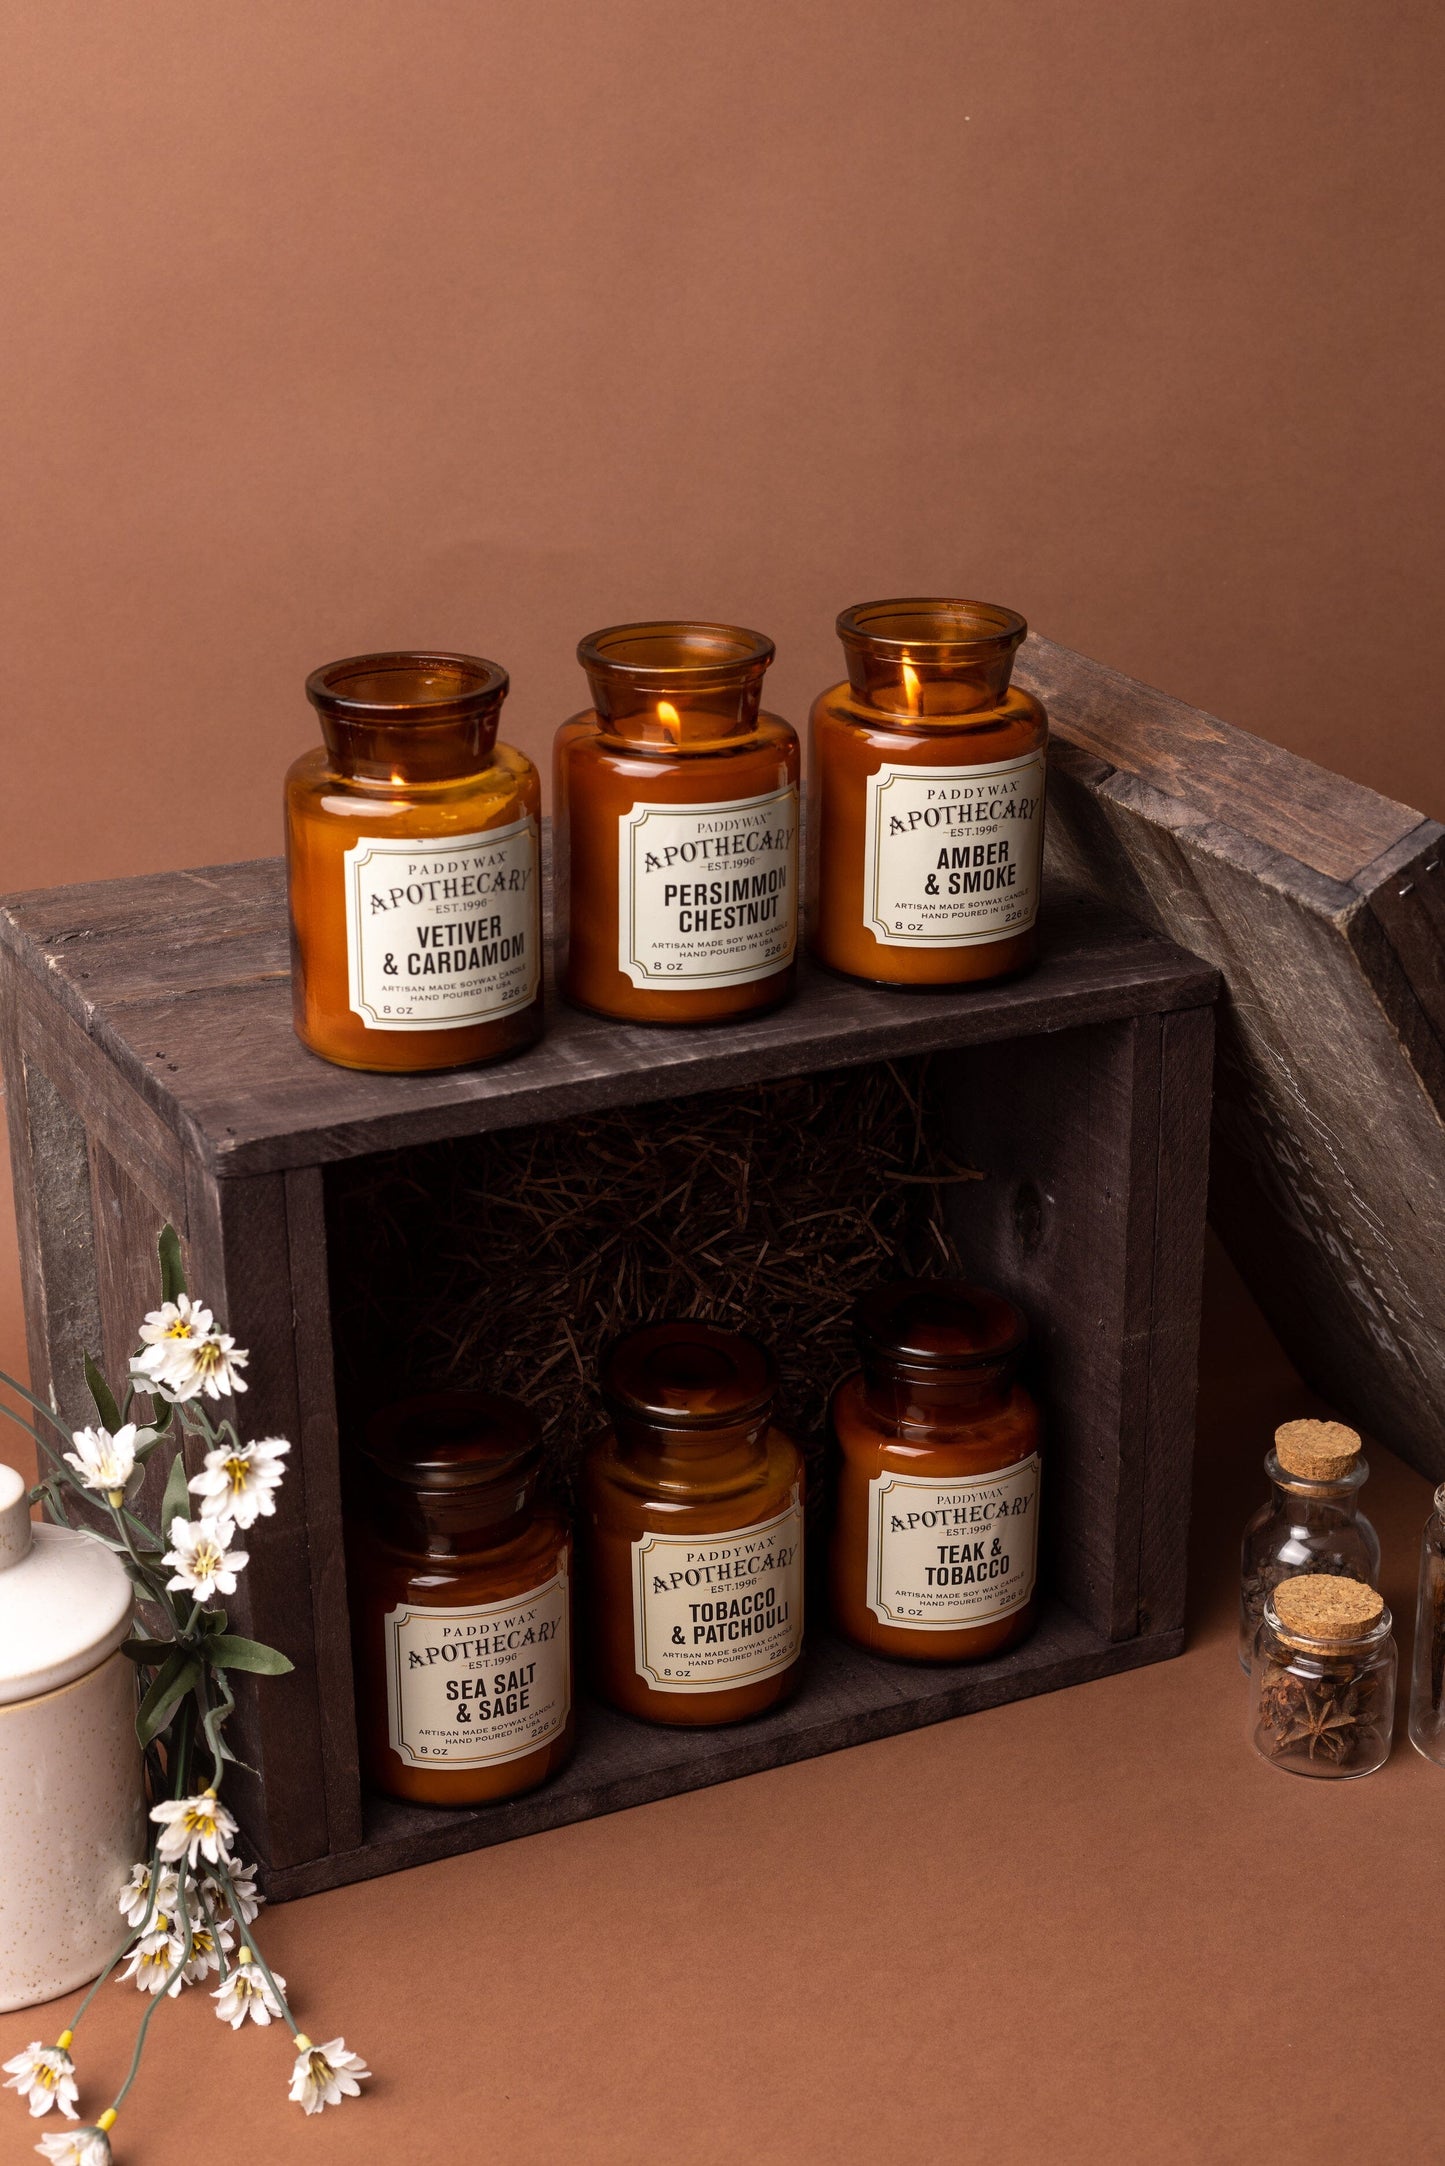 6 scents from the apothecary line on a wooden box